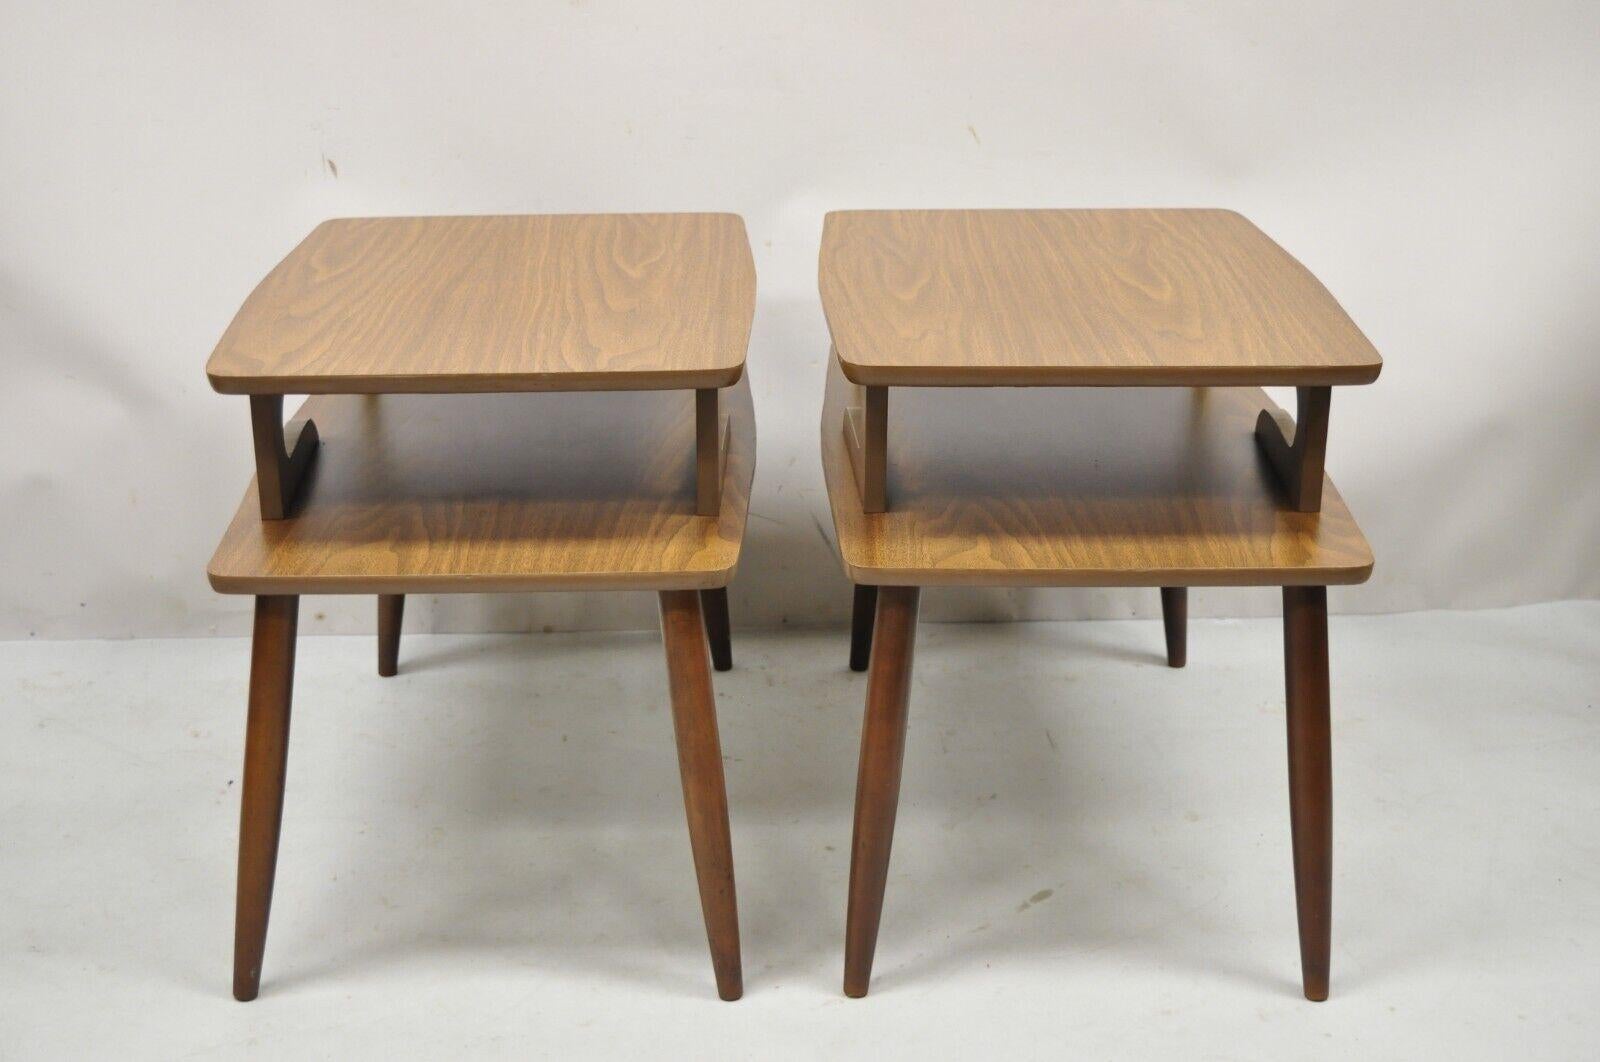 20th Century Mid Century Modern Walnut and Laminate Top 2 Tier Step Up End Tables - a Pair For Sale